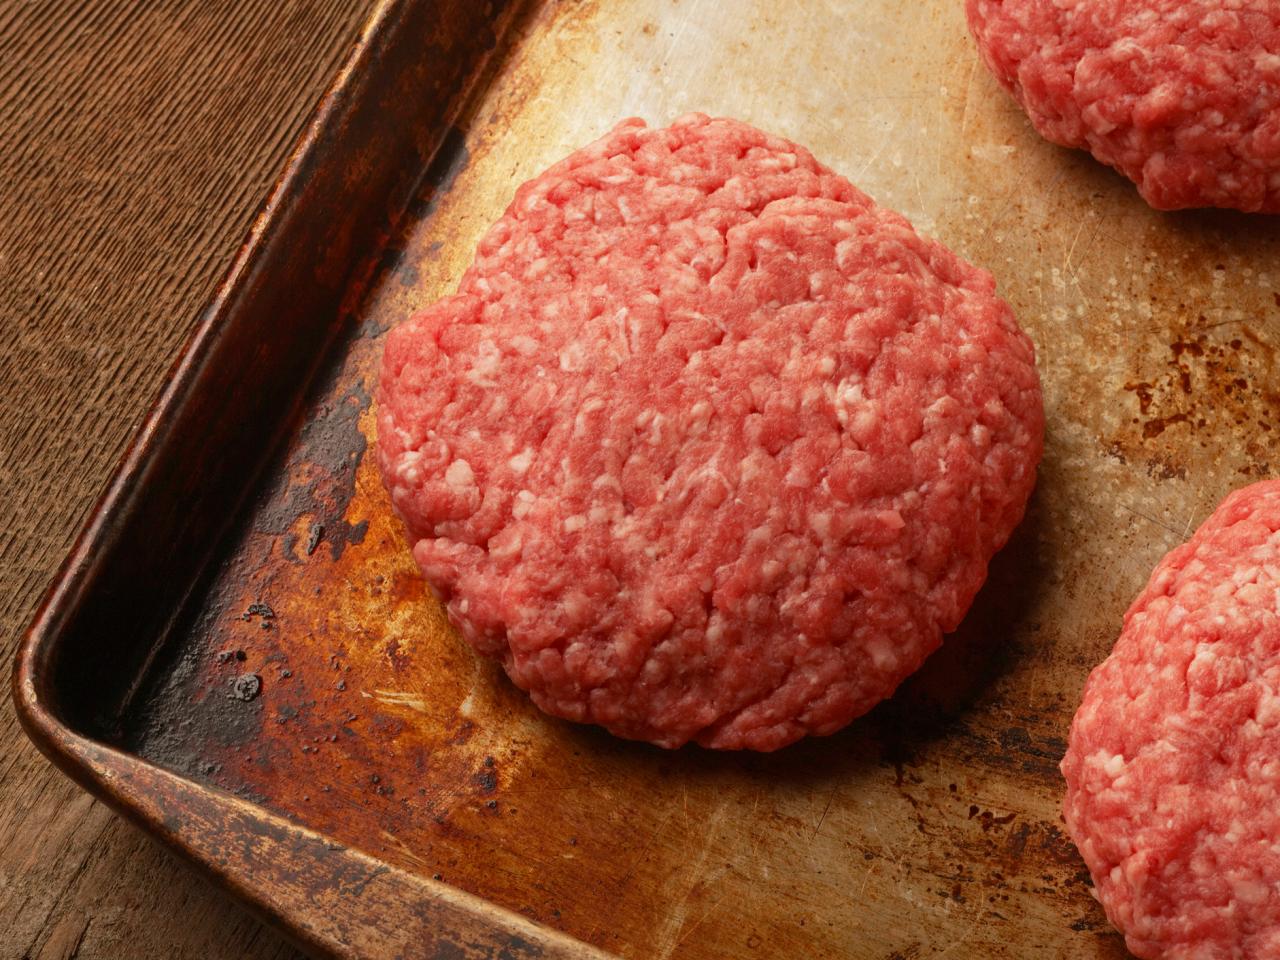 How to Tell If Ground Turkey Has Gone Bad